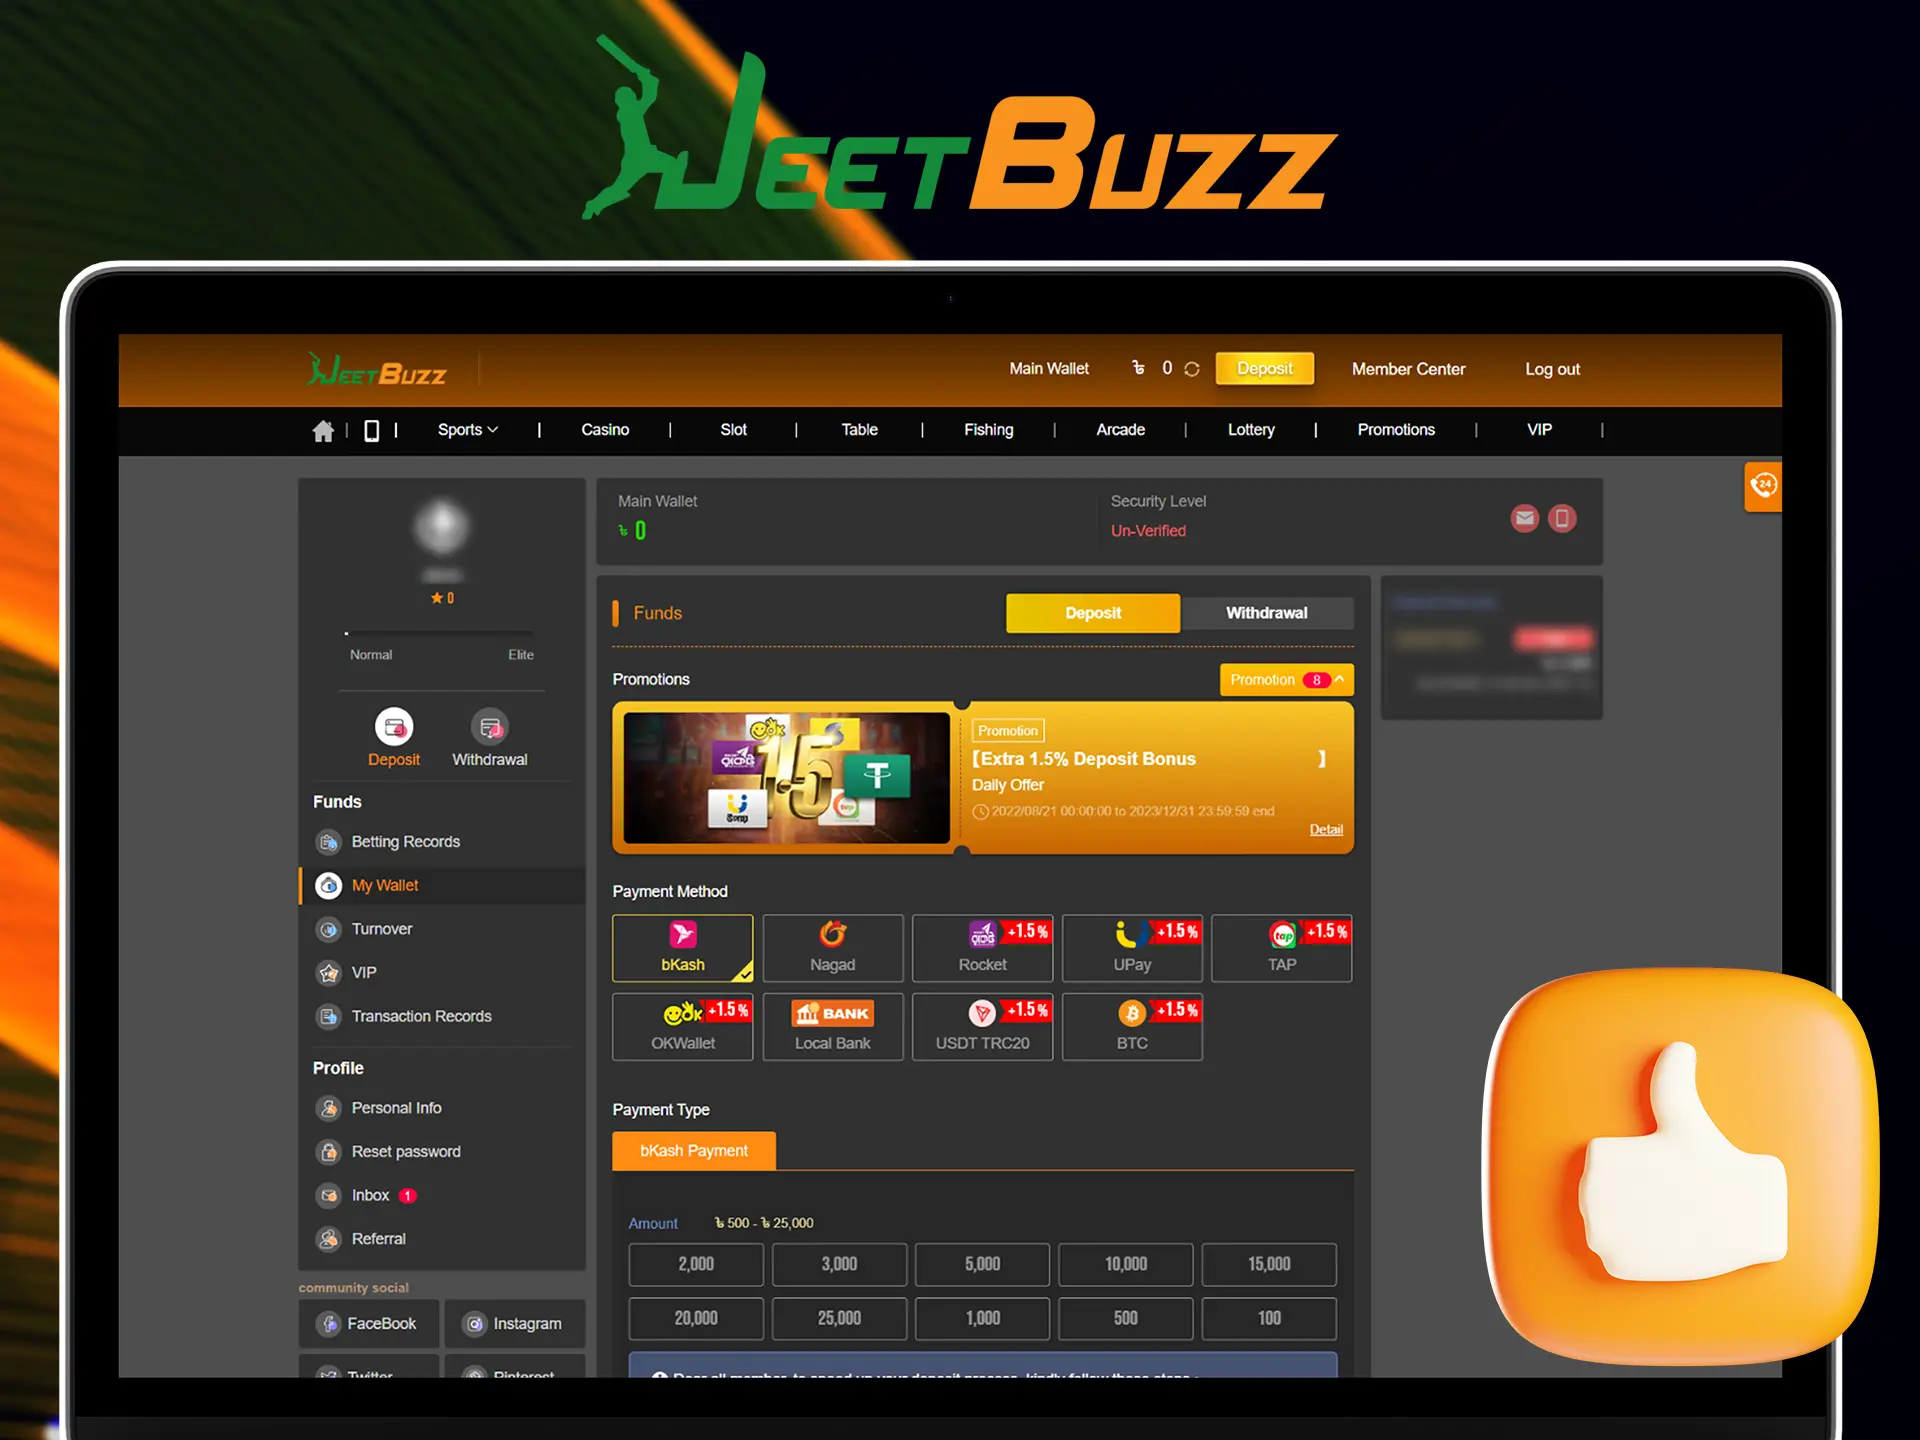 JeetBuzz betting company has has its own licence.